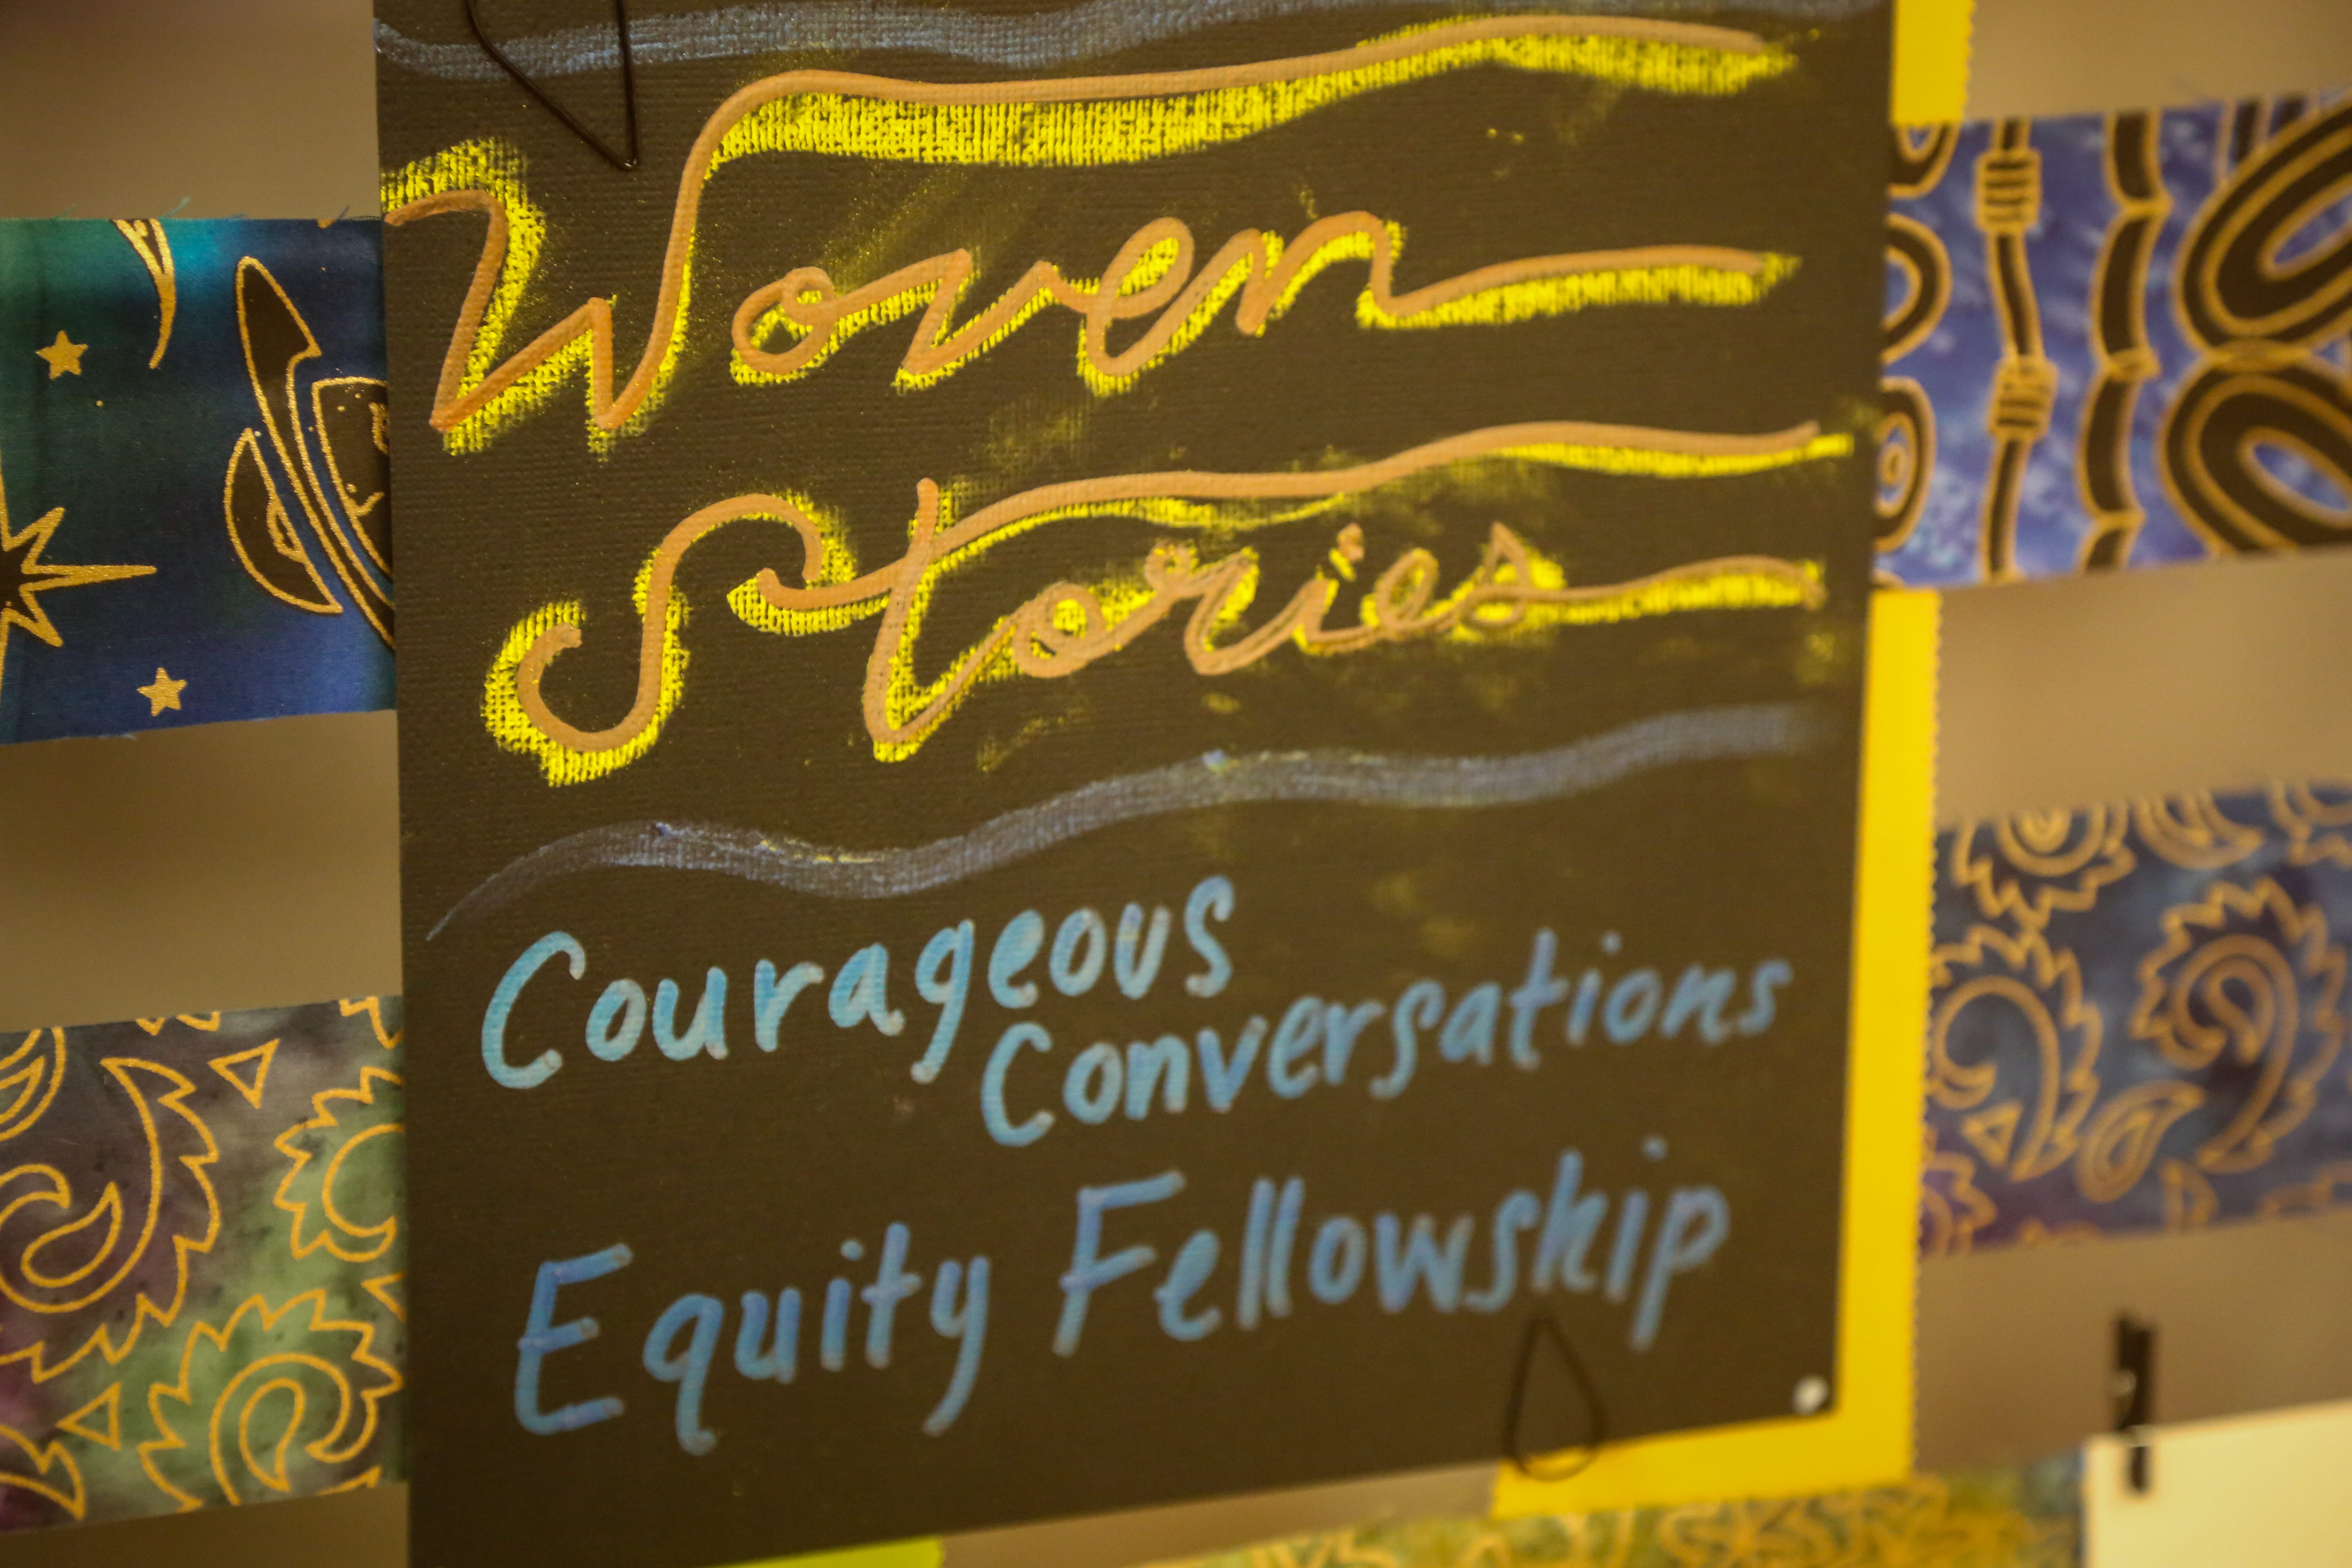 Text on creative project reading Woven Stories, Courageous Conversations Equity Fellowship